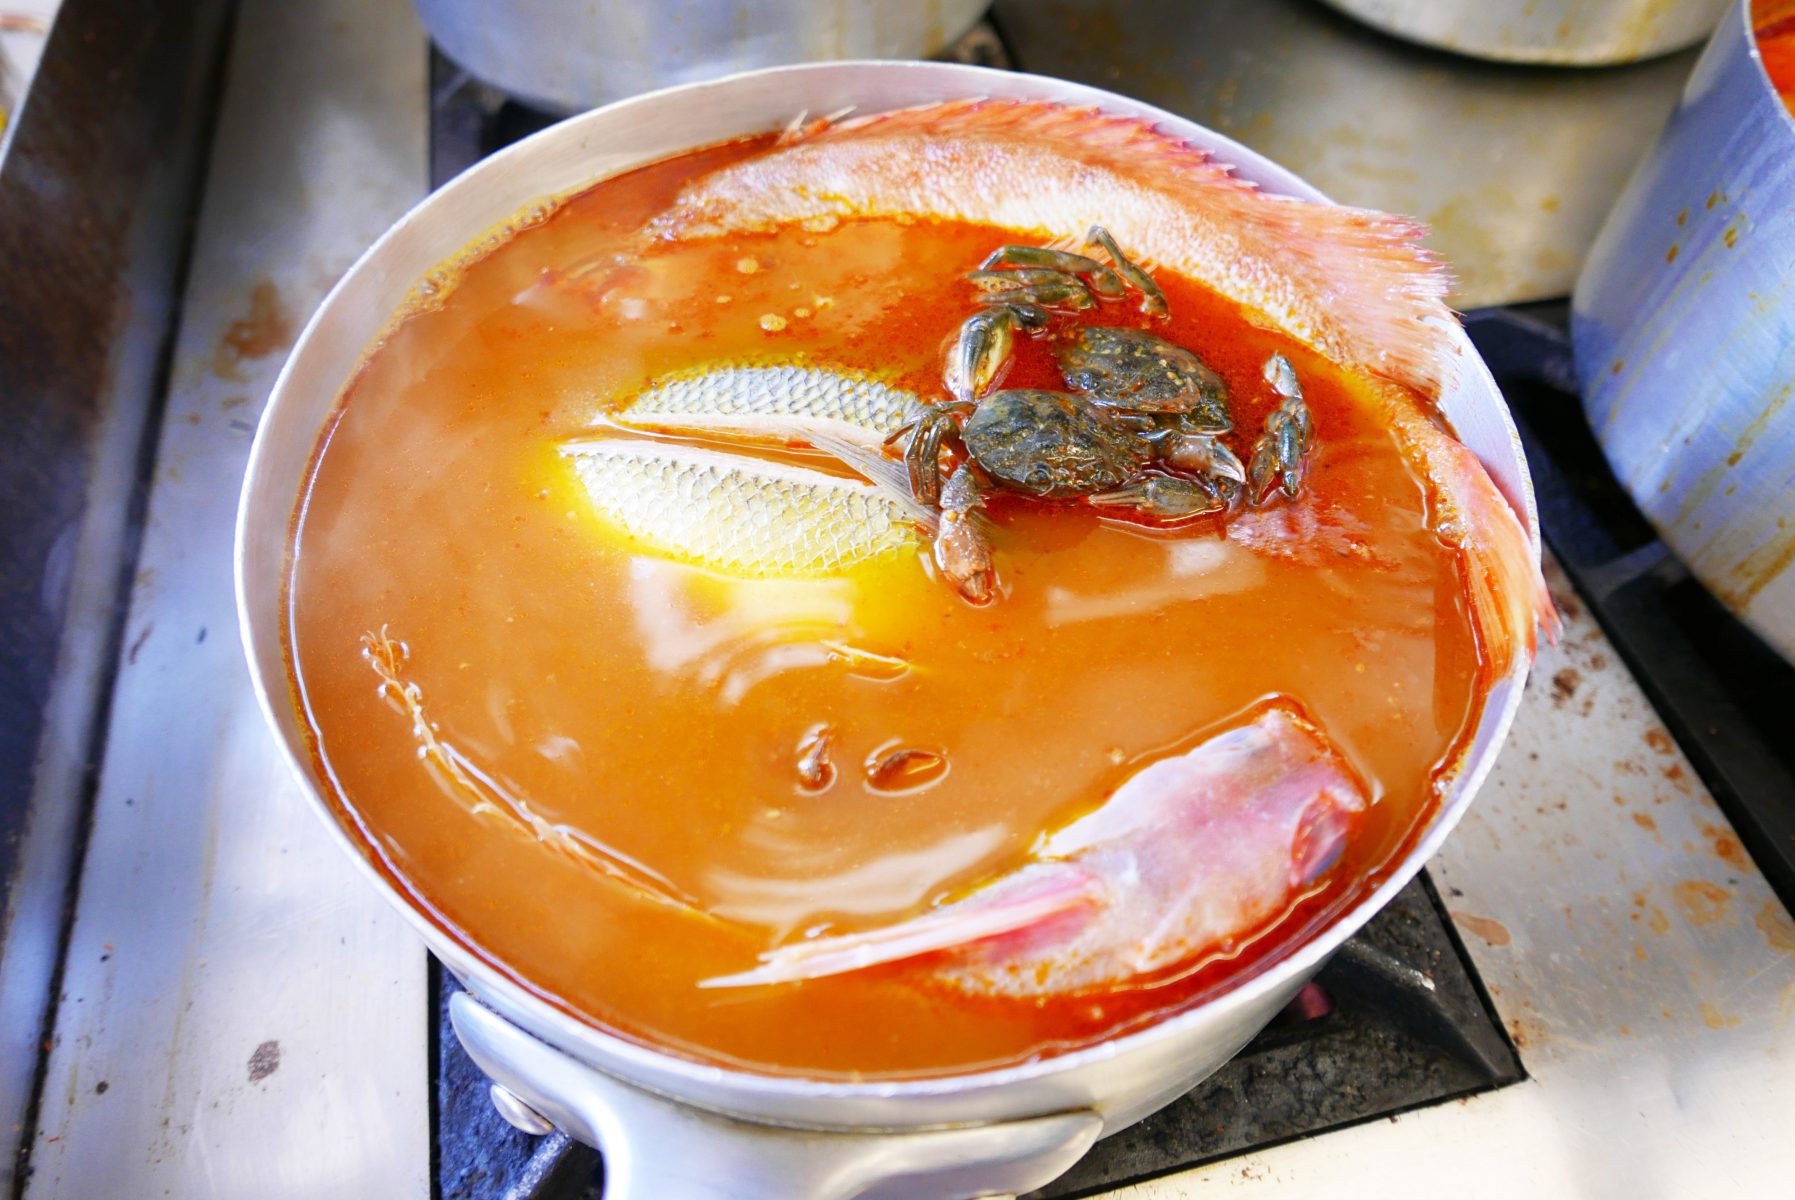 The fish is boiled directly in the soup